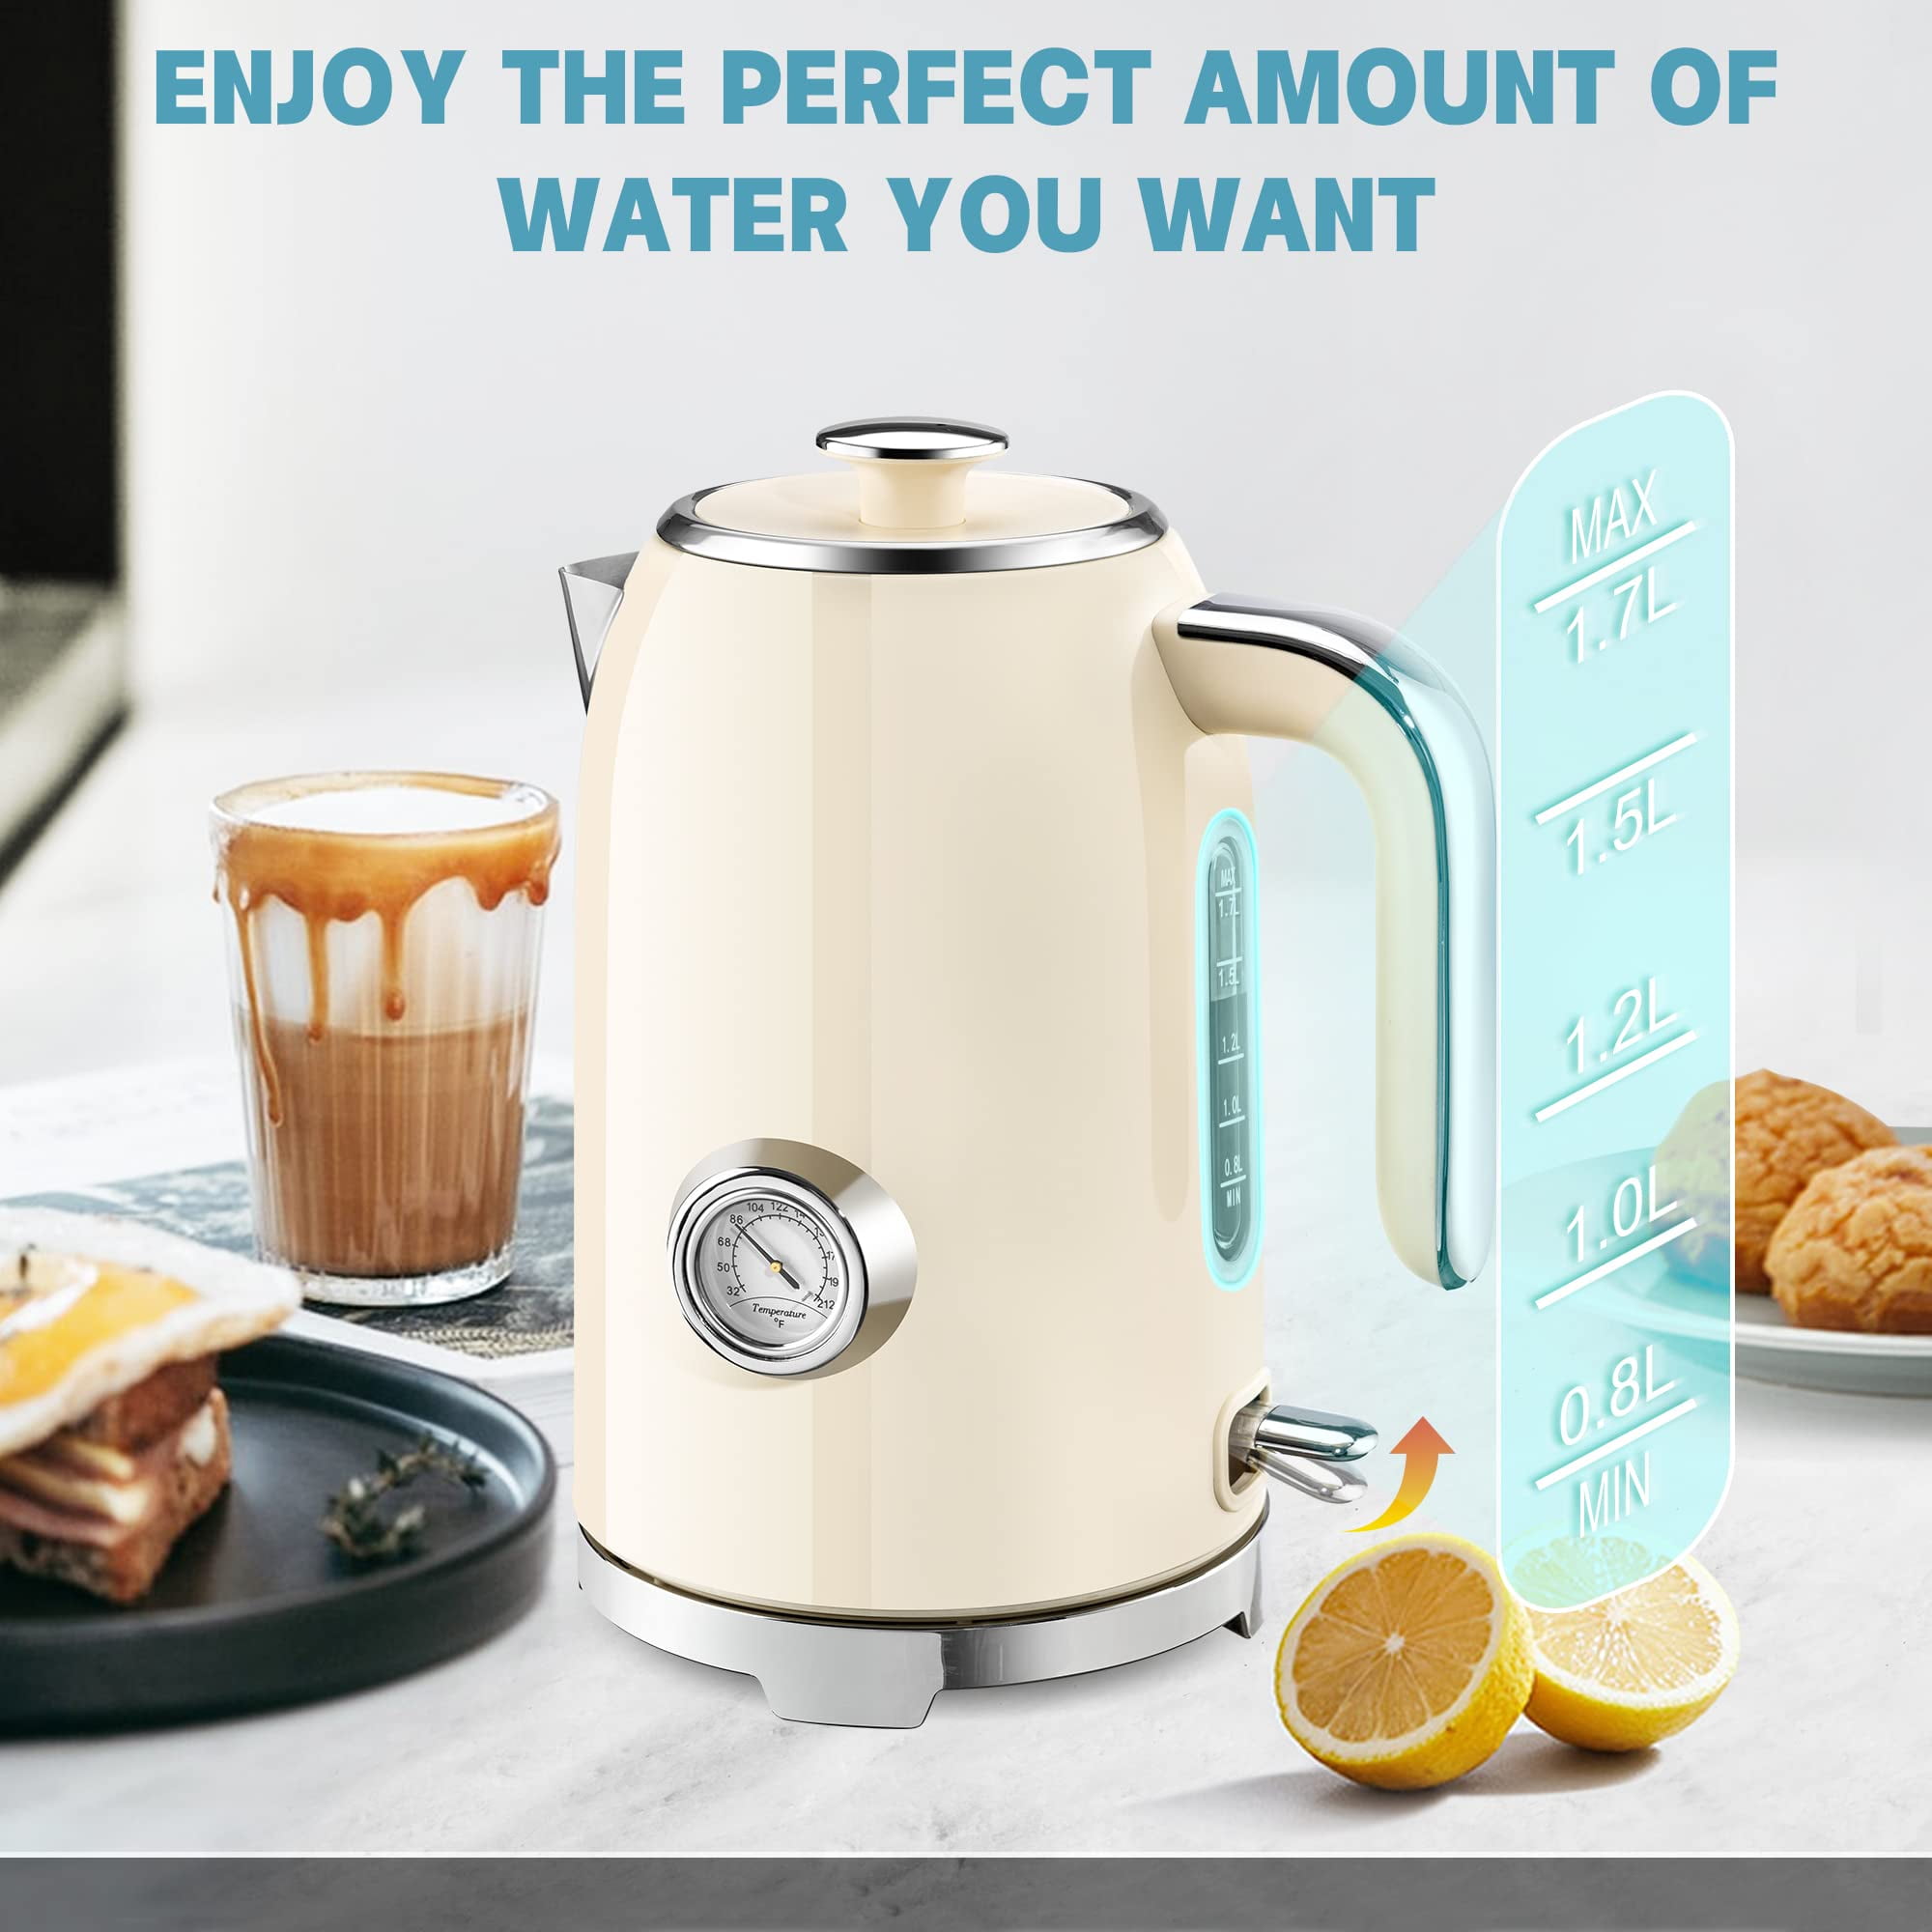 SULIVES Electric Hot Water Kettle with Temperature Gauge 